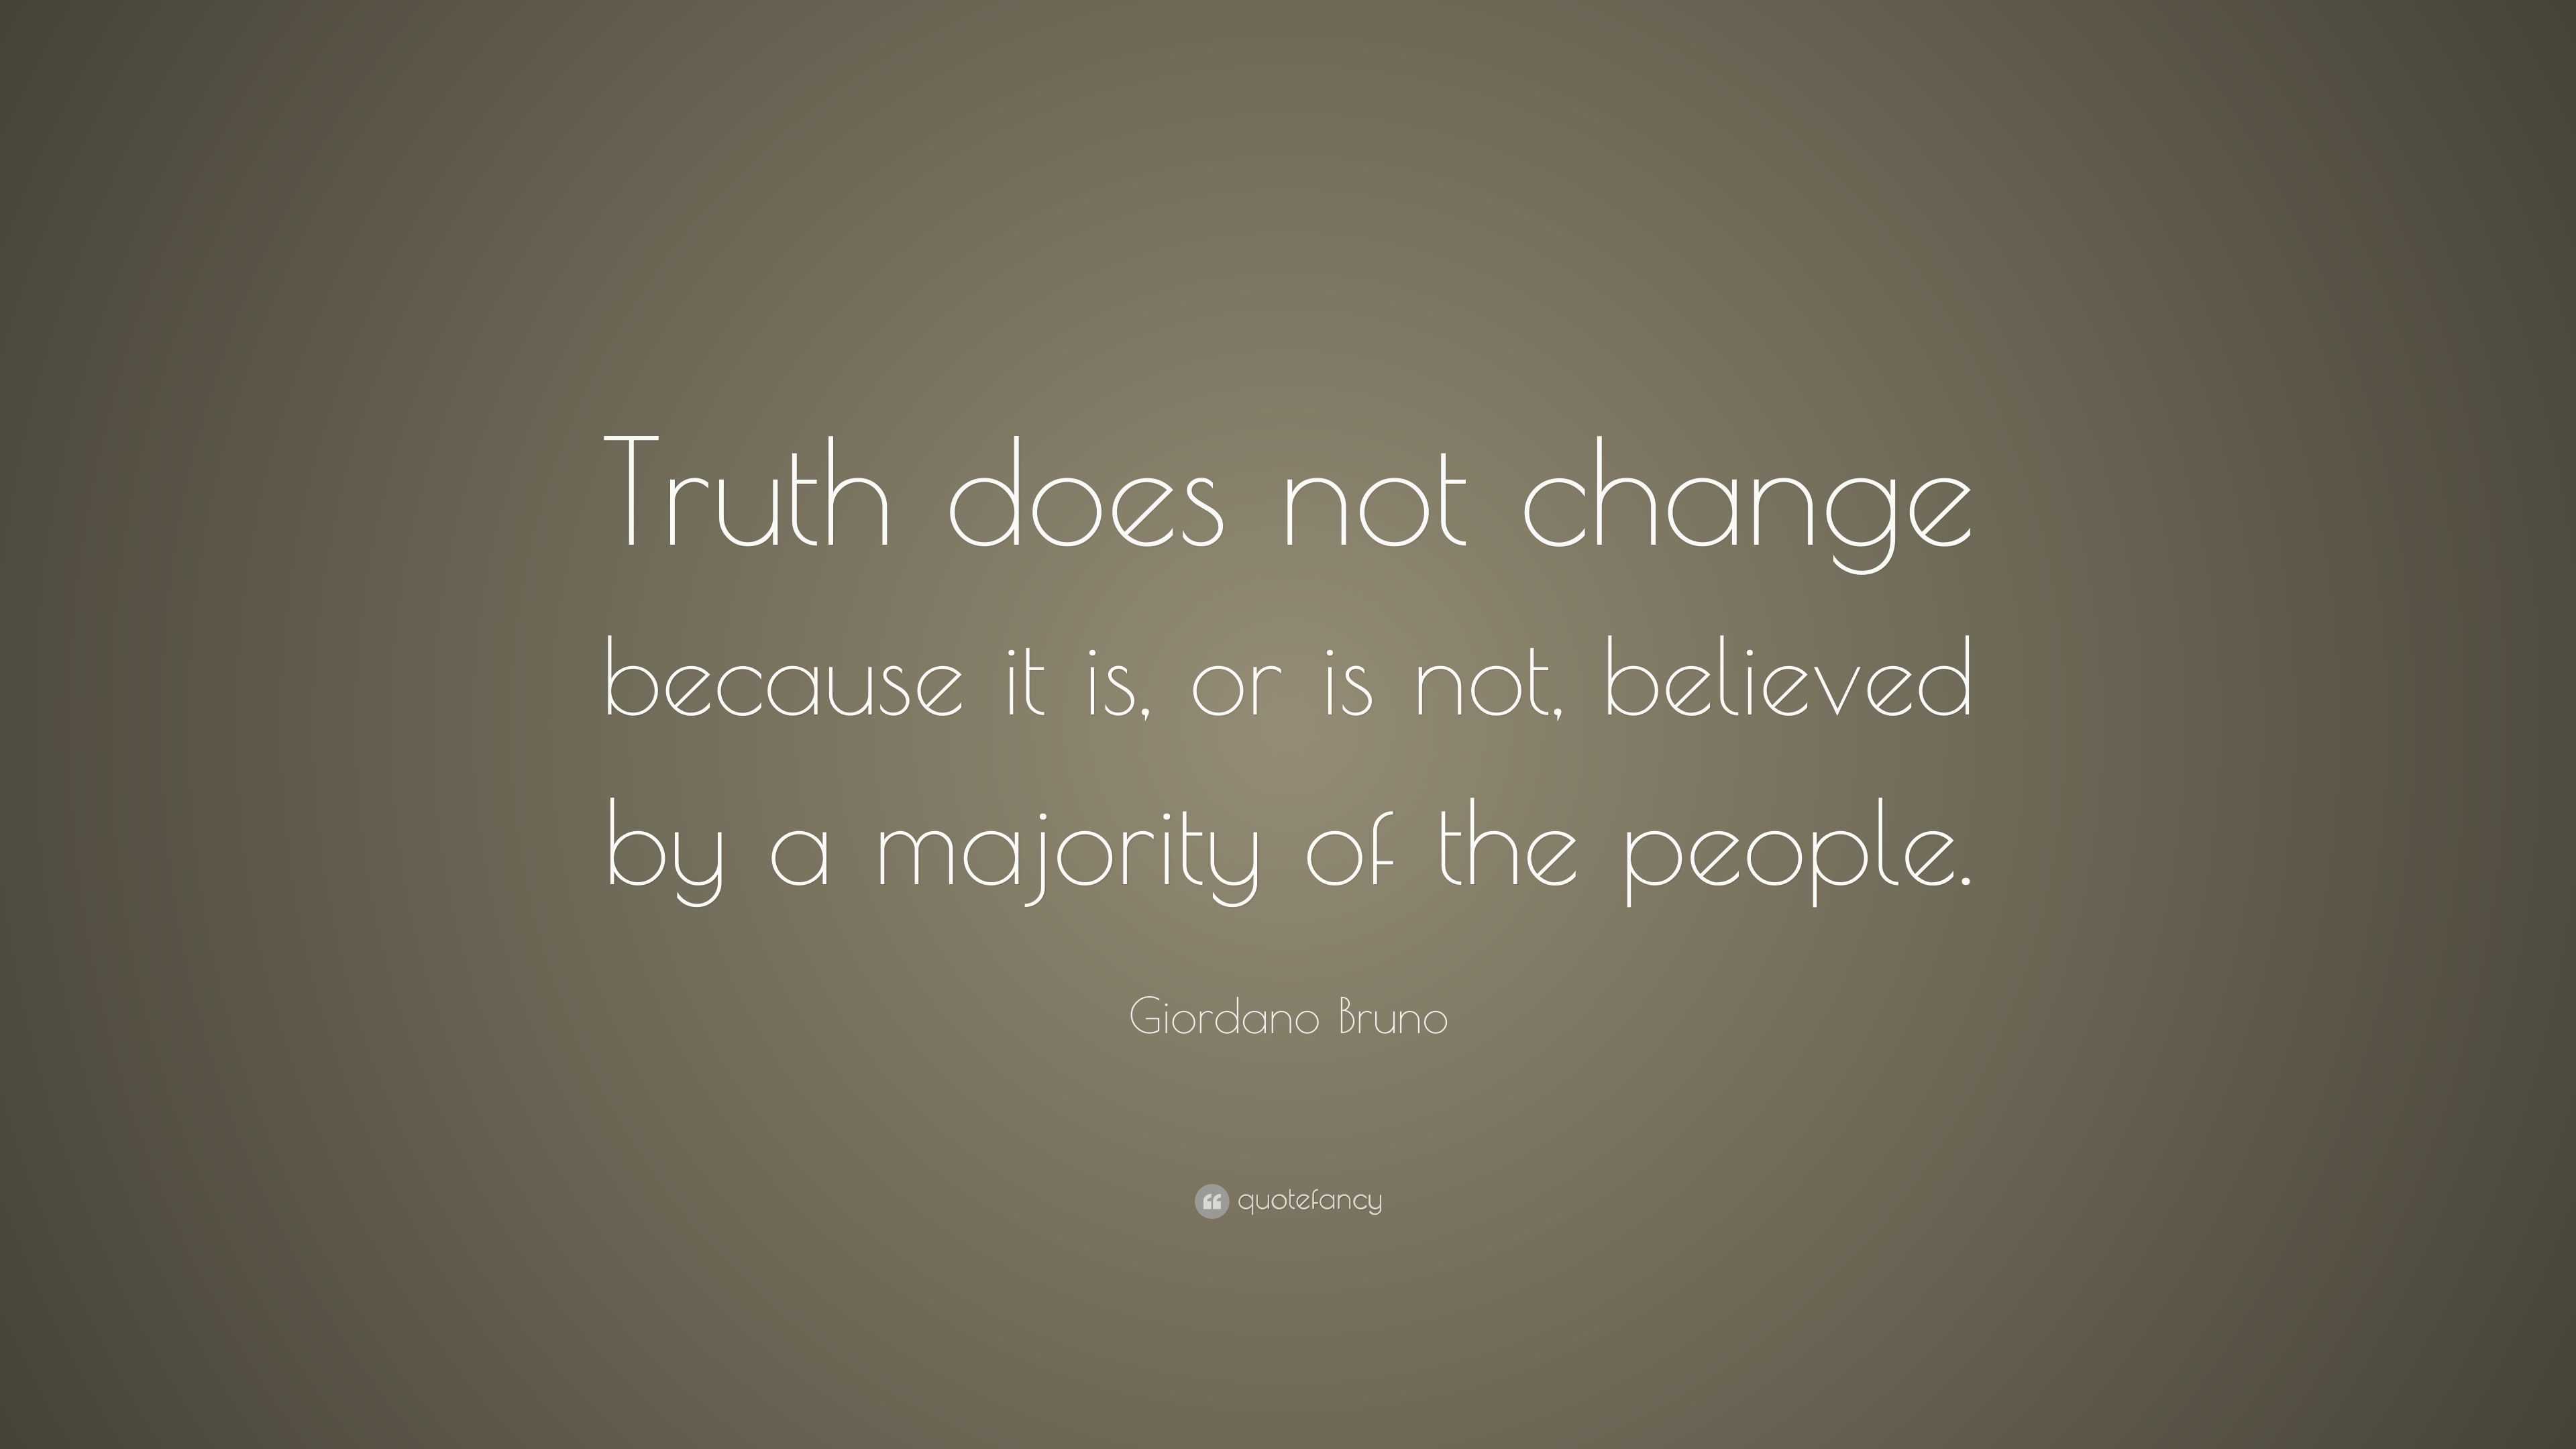 Giordano Bruno Quote: “Truth does not change because it is, or is not